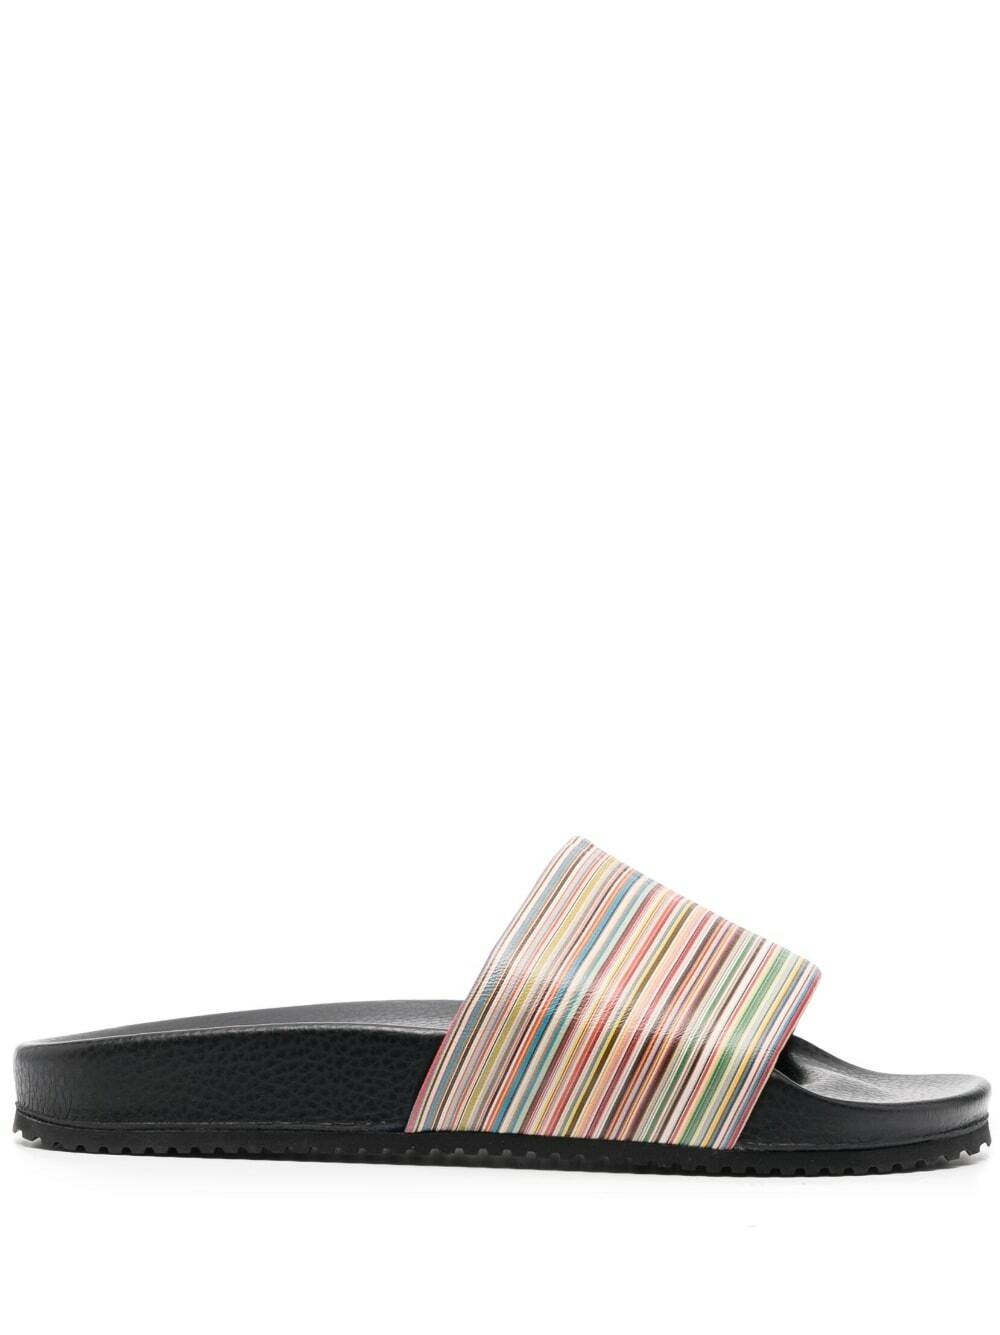 Photo: PAUL SMITH - Striped Rubber Pool Slides